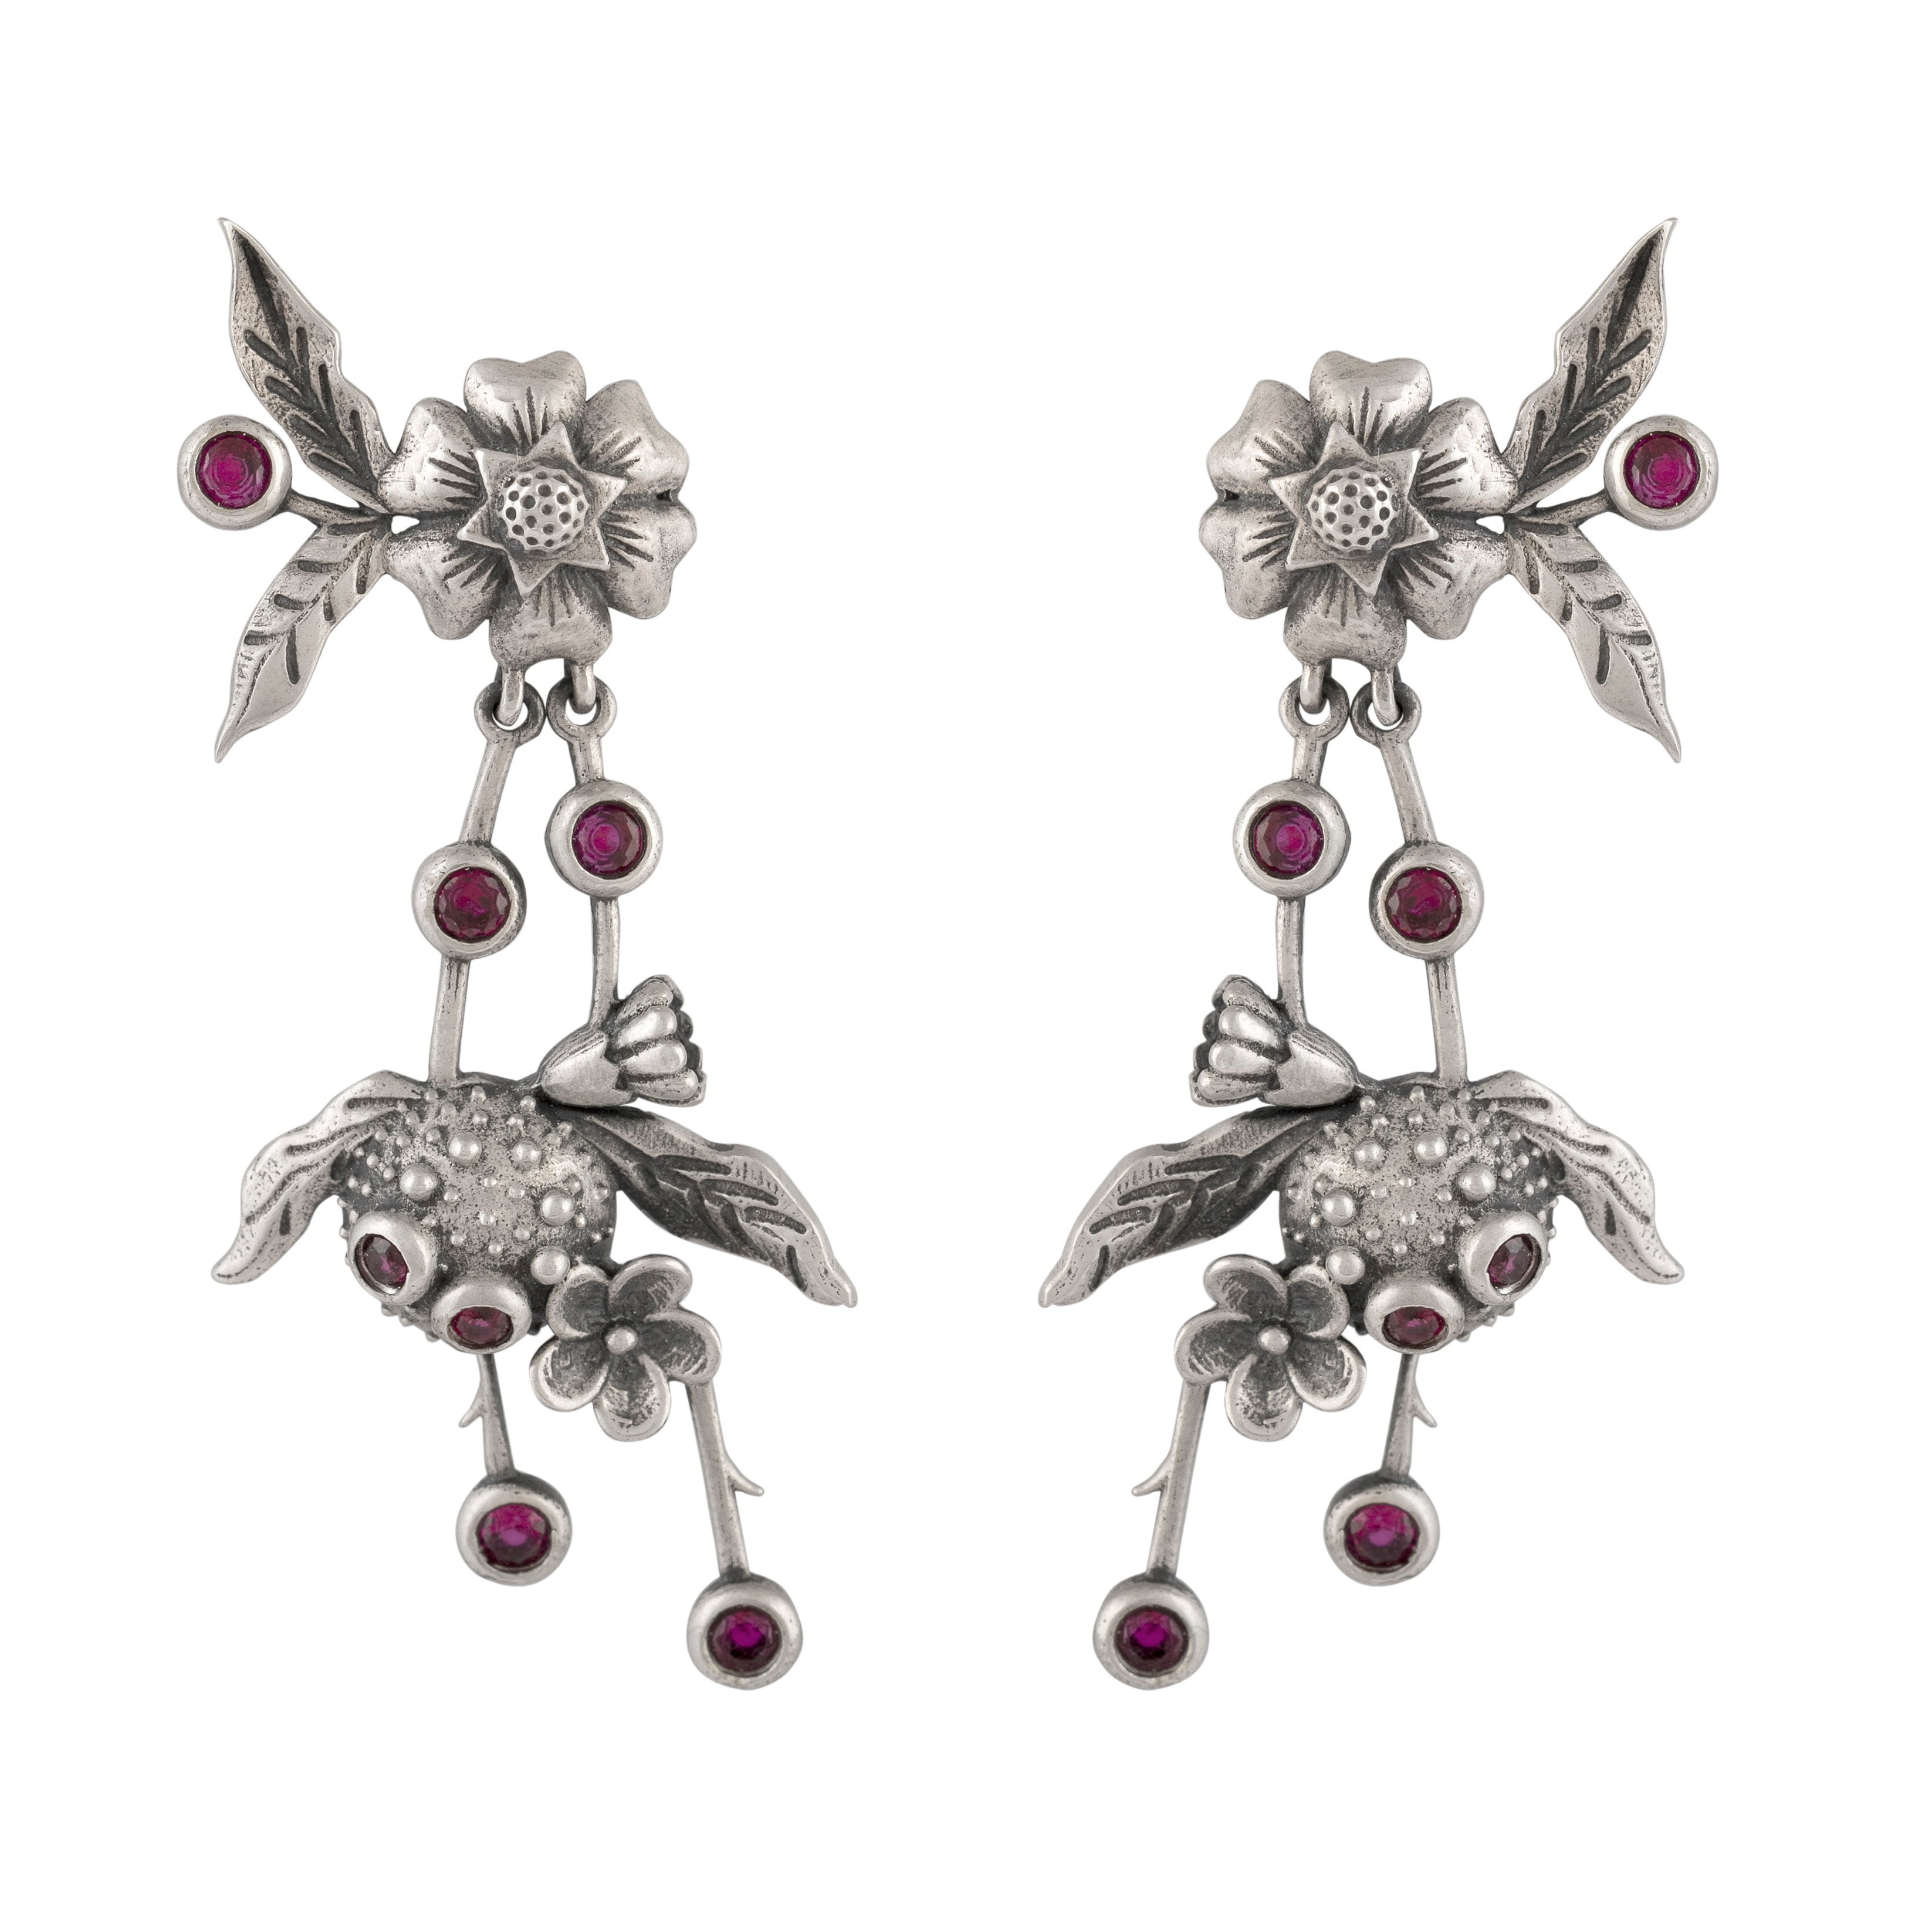 William Morris - Blossom Silver Earrings by Moha